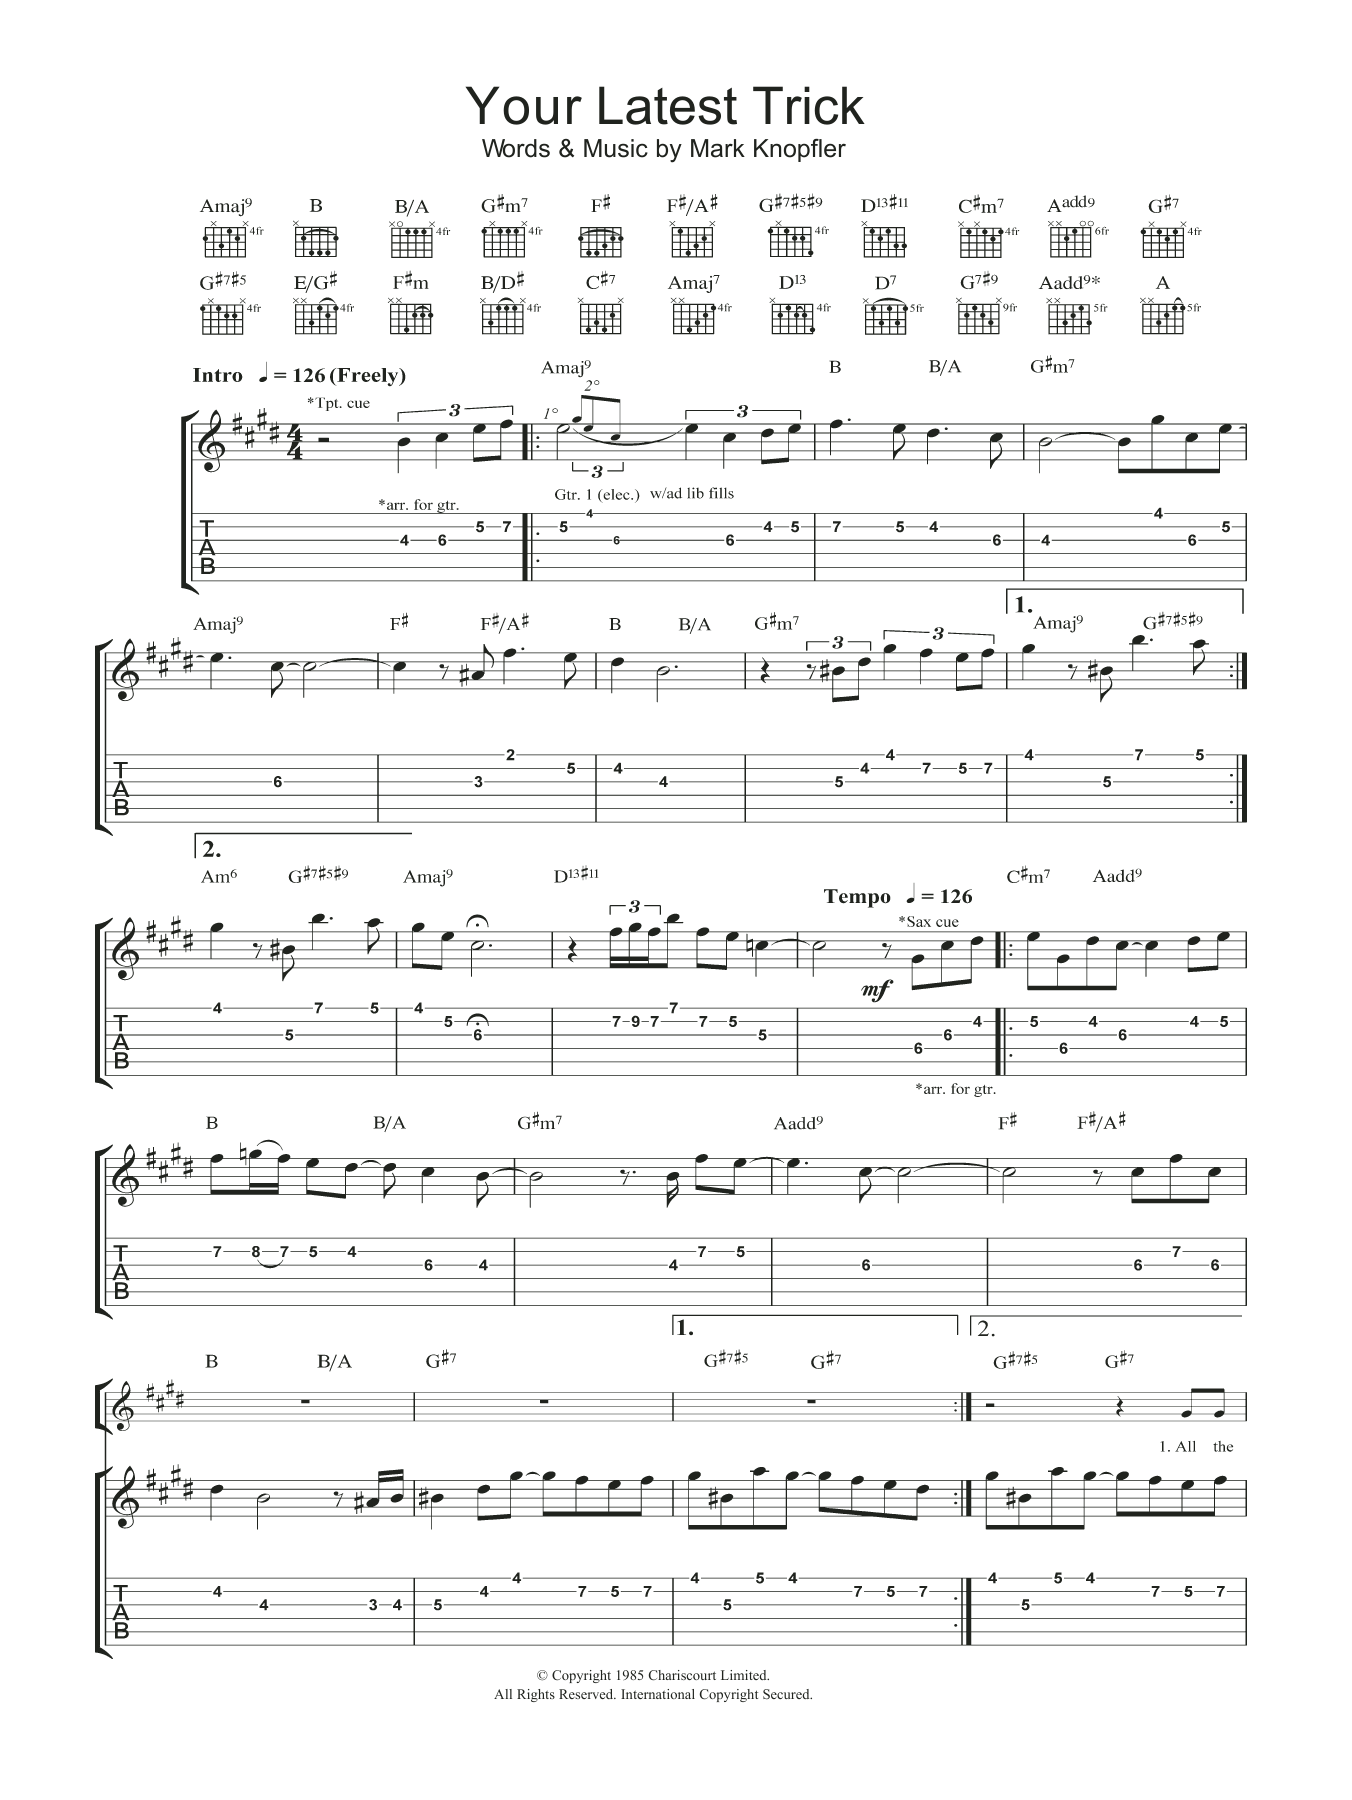 Download Dire Straits Your Latest Trick Sheet Music